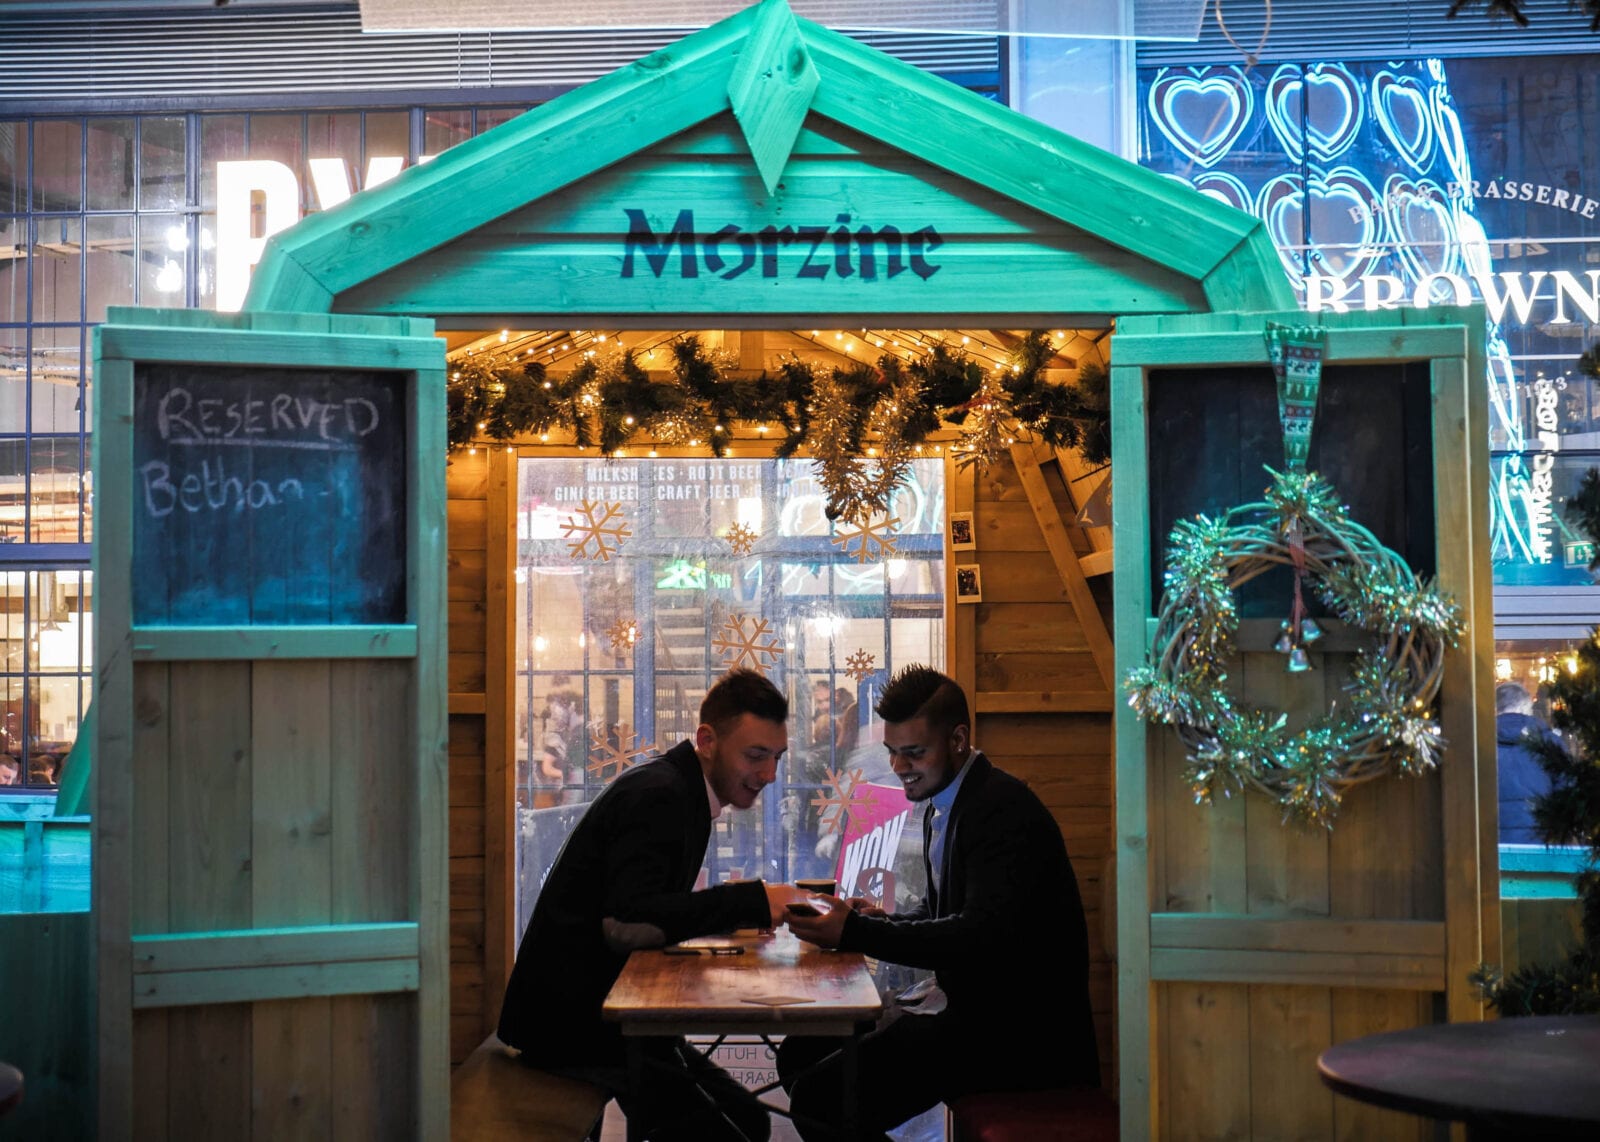 Bar Hütte takes over Great Northern square with music, mince pies and private alpine cabins, The Manc